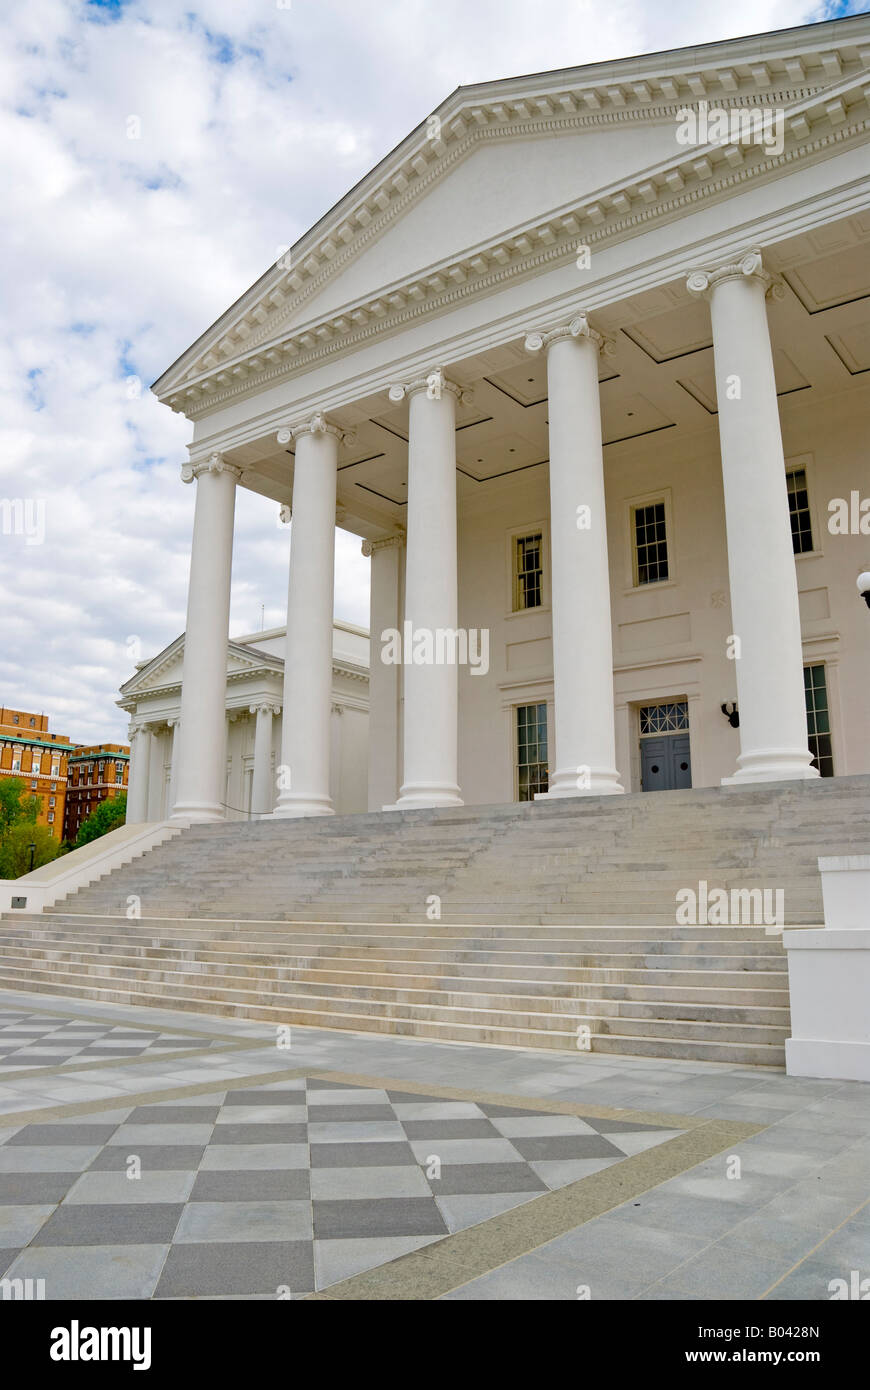 The Virginia State Capitol building in Richmond, Virginia, the seat of the Virginia state government. Stock Photo